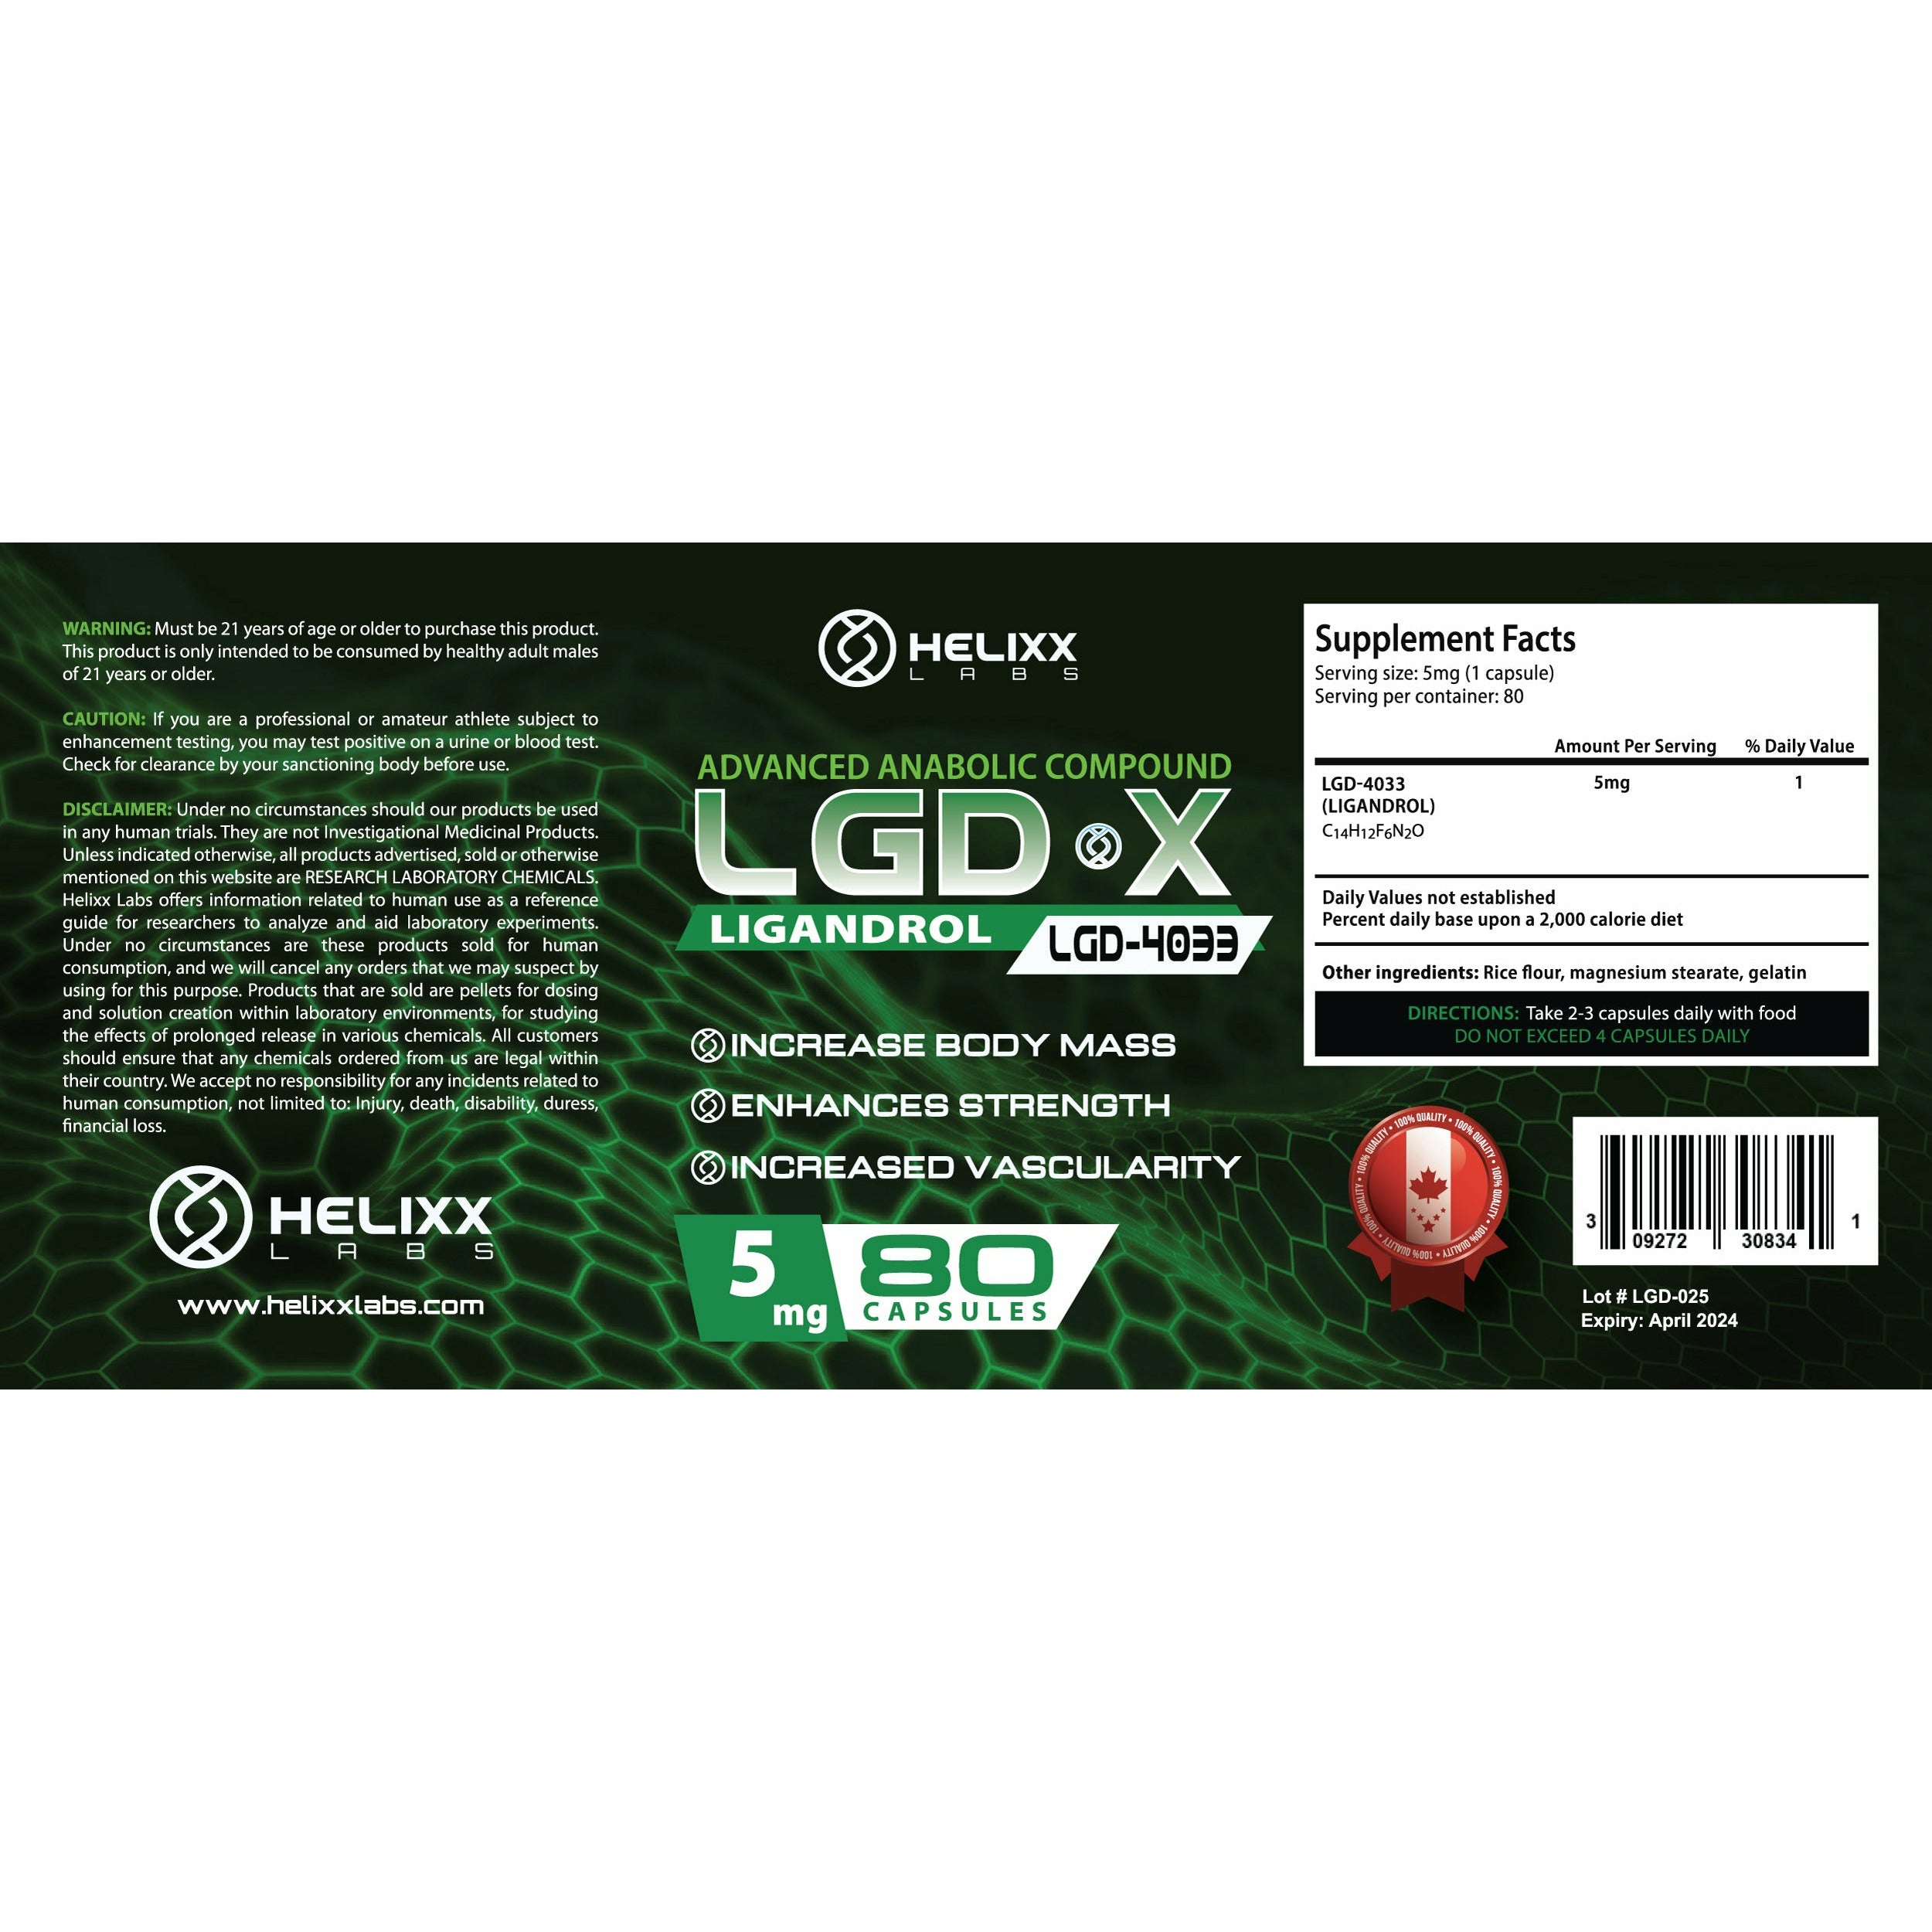 Helixx LGD X 5mg - 60 capsules BEST BY APRIL 2024 Helixx Top Nutrition Canada